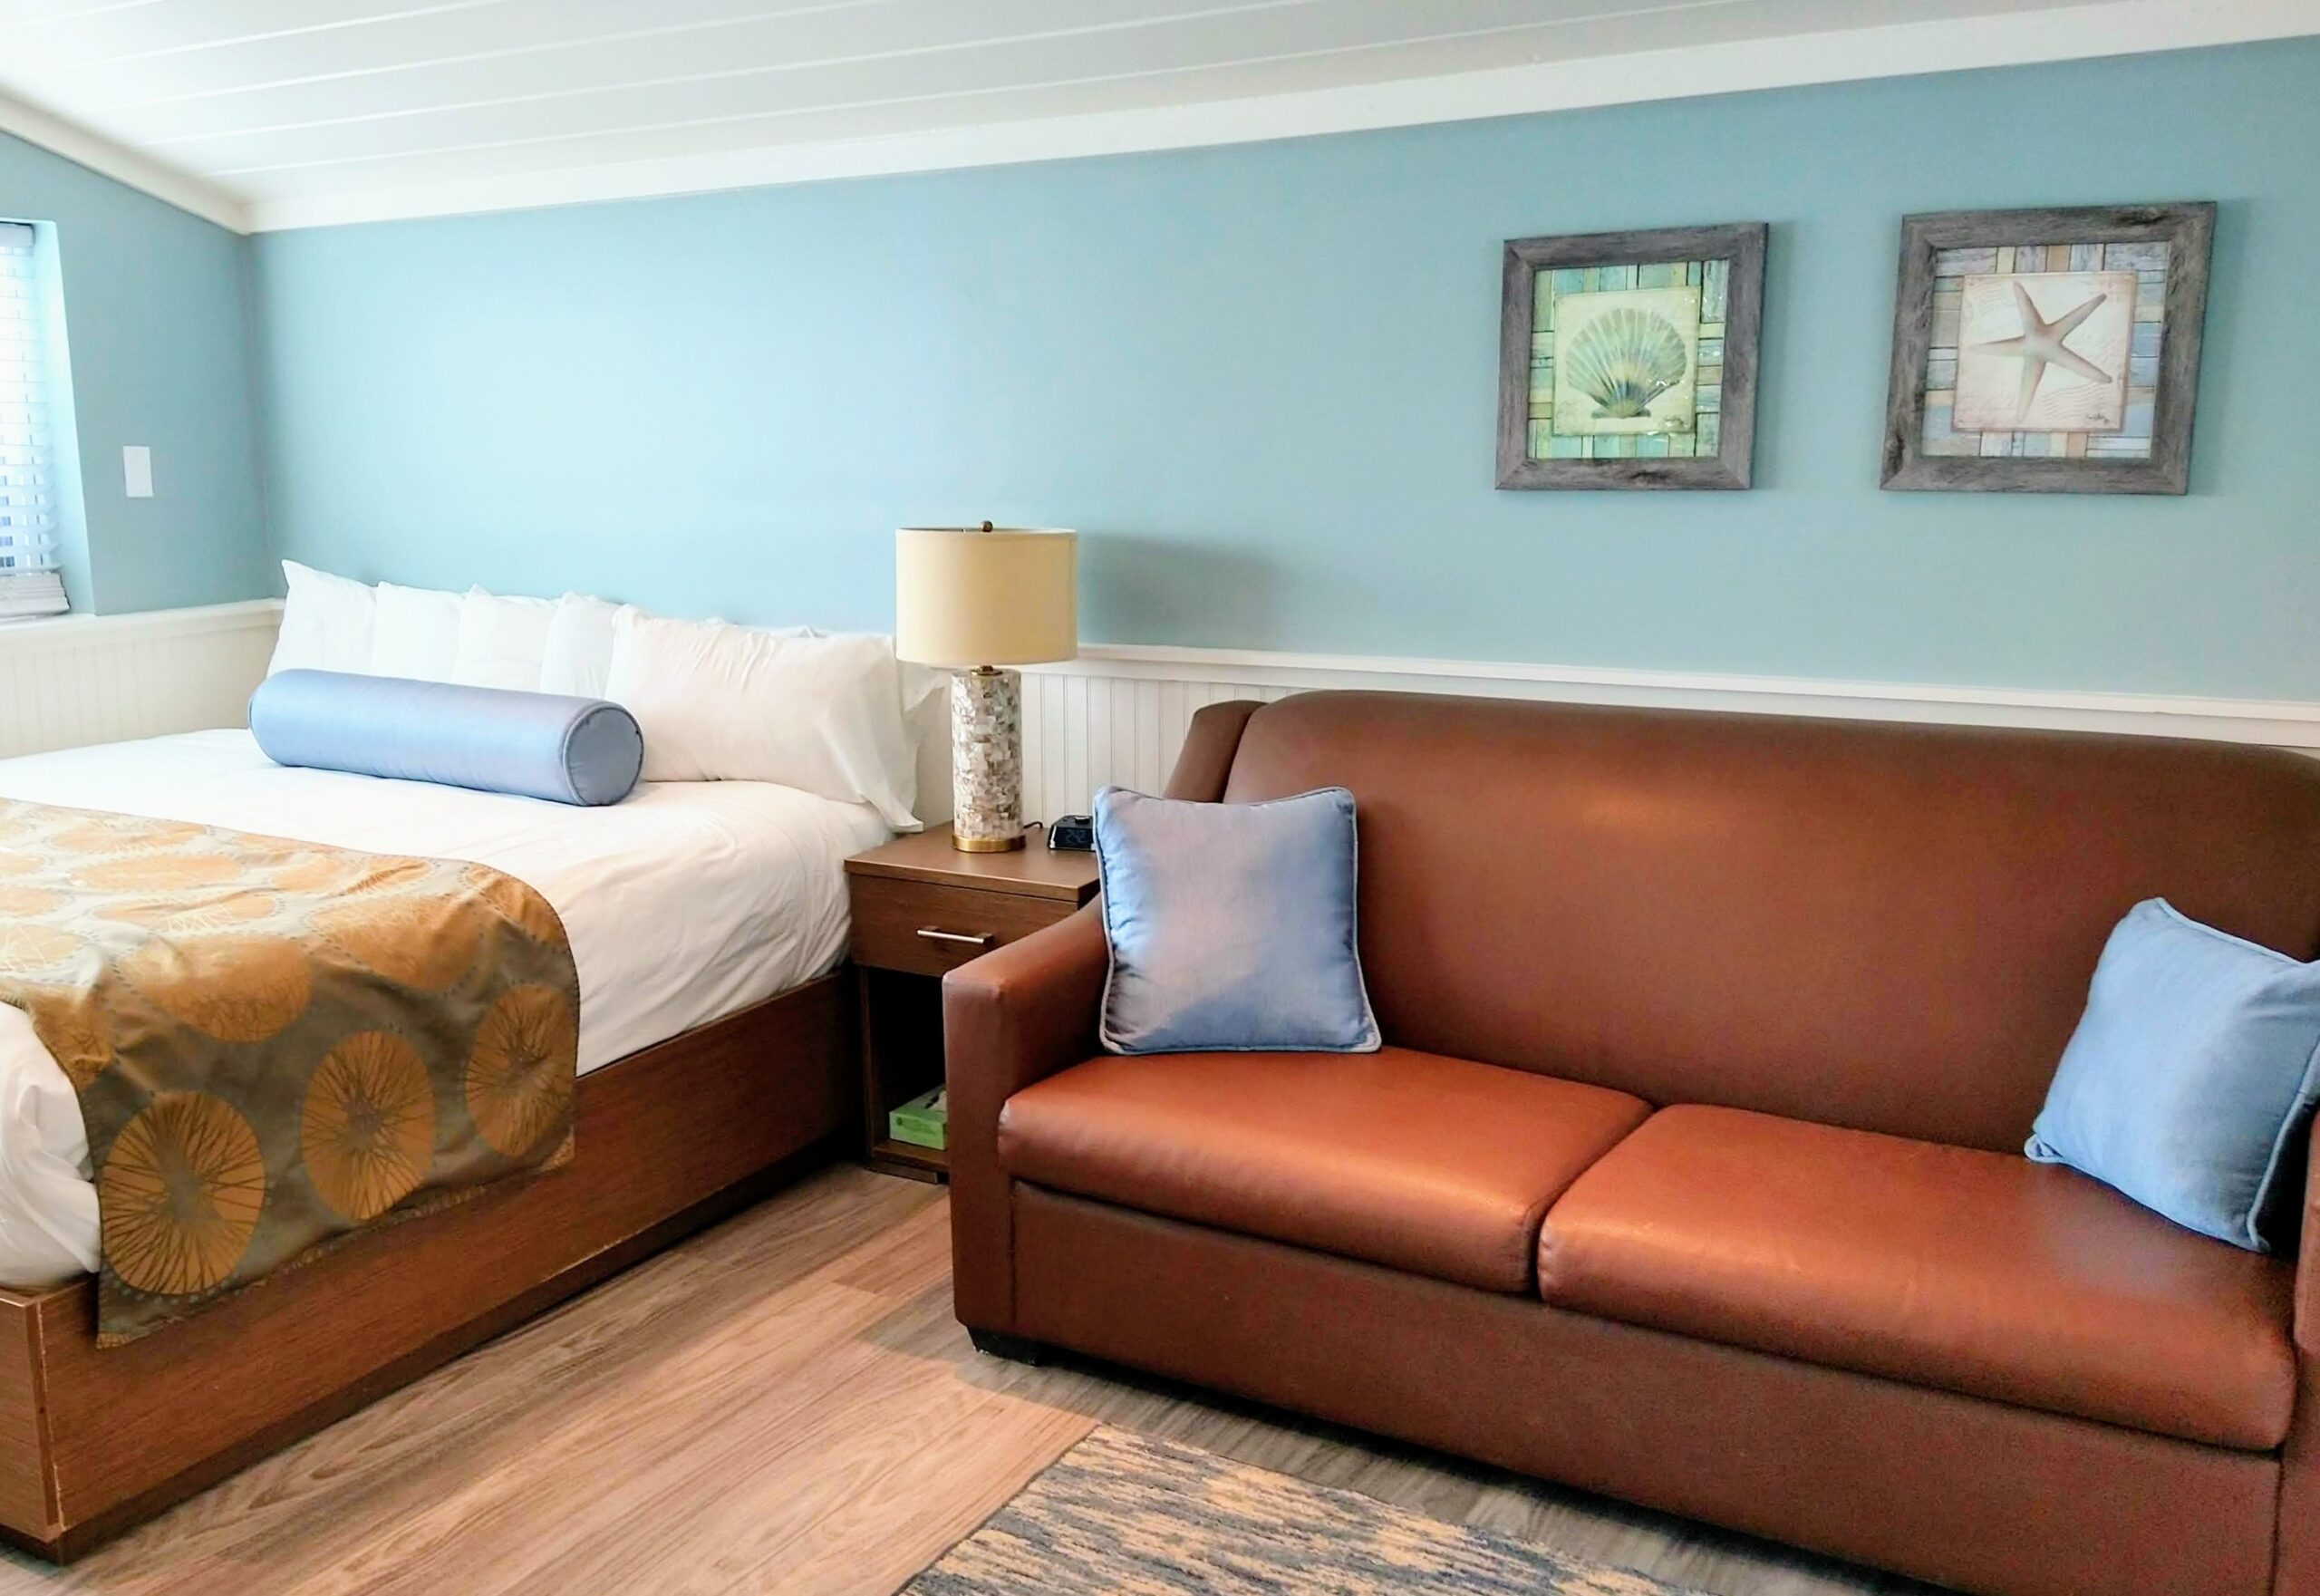 Beachcomber Cottage has a King bed and two Queen beds.